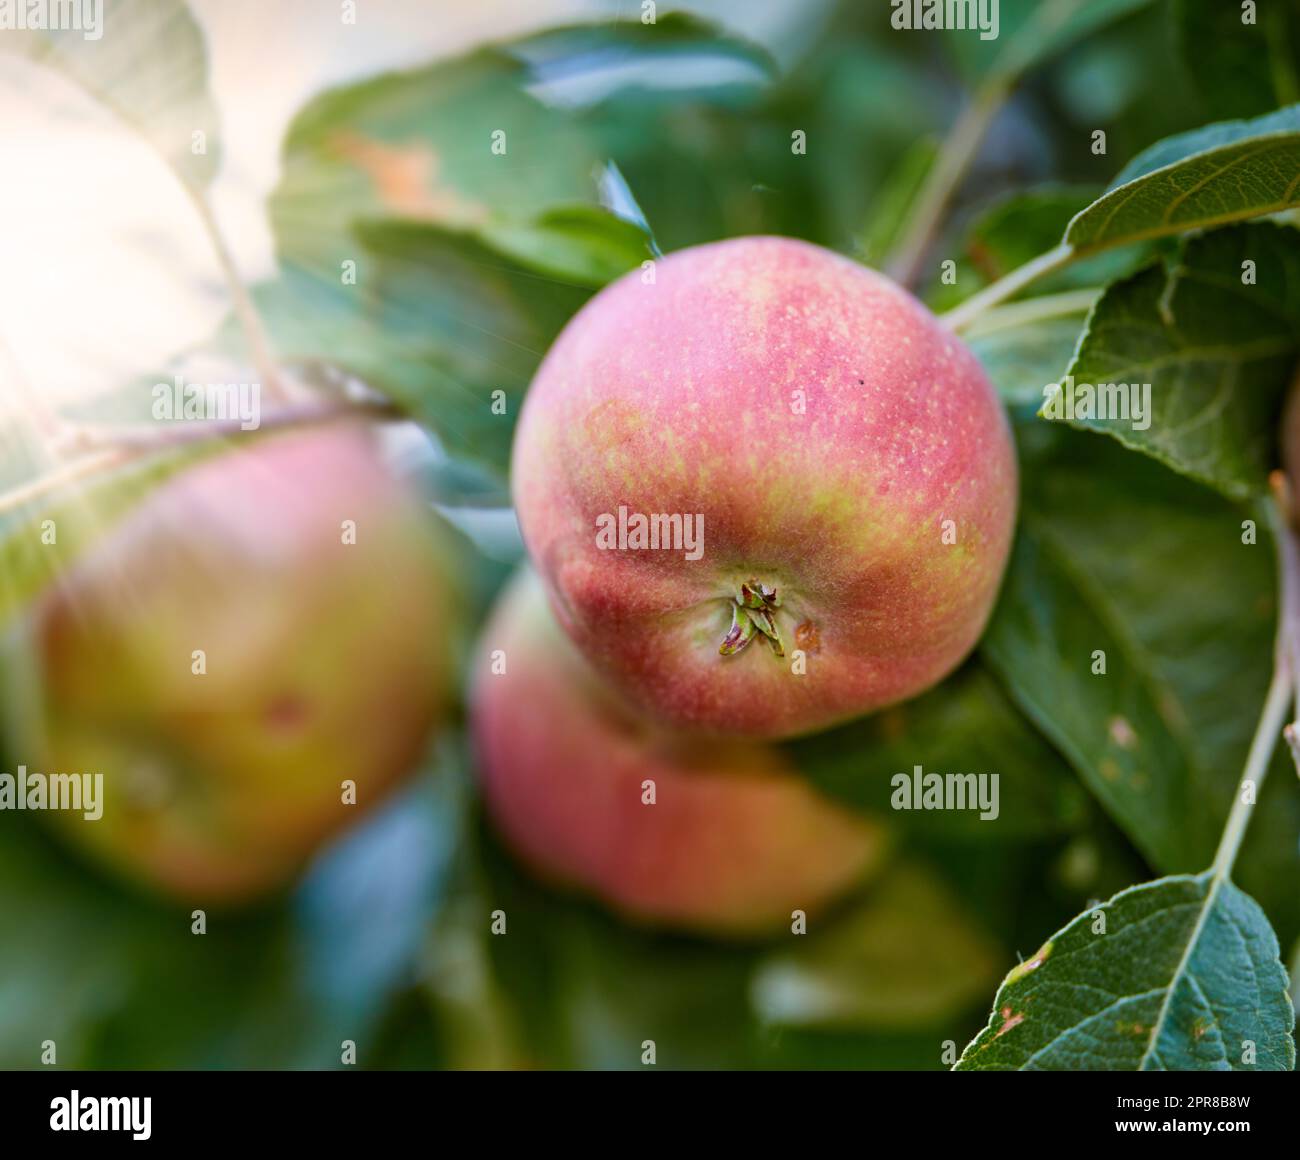 Closeup of a group of red Liberty apples on a tree in an orchard or garden outside. Organic and sustainable fruit farming, produce growing. Ripe and ready for a fruitful agricultural harvest Stock Photo